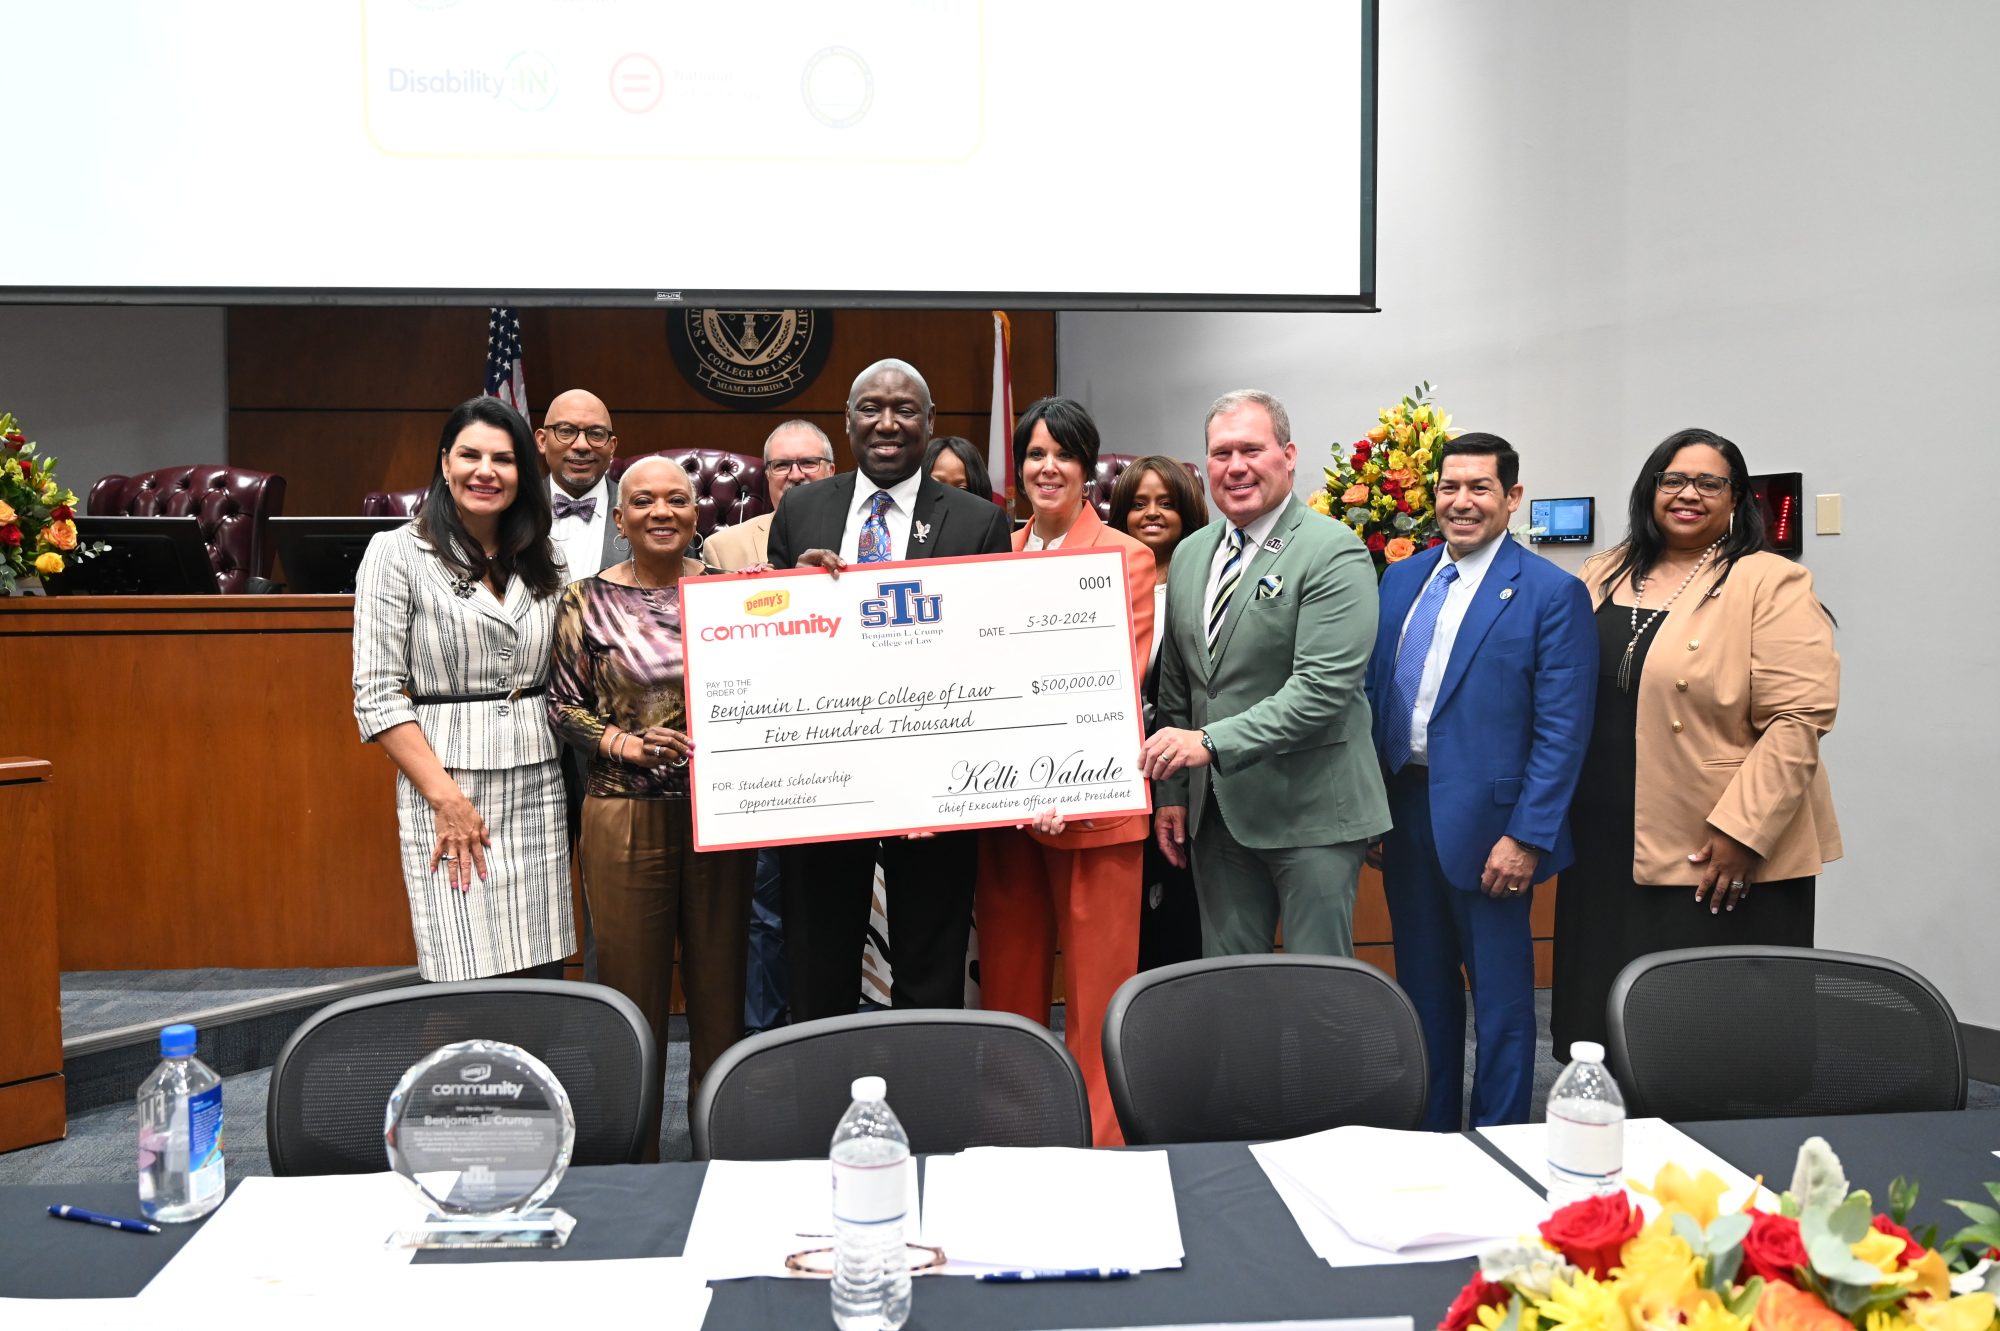 As part of Denny’s launch of its nationwide Community Alliance, a scholarship gift of $500,000 was given to the St. Thomas University Benjamin L. Crump College of Law. Crump accepted the donation from Denny’s in support of the College of Law’s commitment to social justice.Pictured (l-r): Dean Tarlika Nunez-Navarro, Benjamin L. Crump College of Law; Randy Brown, Denny’s Senior Manager, Business Diversity; Brenda J. Lauderback, Chair, Board of Directors, Denny’s Inc.; Michael Whitacre, Denny’s Director of Franchise Operations; Benjamin L. Crump; Gail Sharps Myers, Denny’s Executive Vice President, Chief Legal and Administrative Officer; Kelli Valade, Denny’s CEO and President; Fasika Melaku-Peterson, Denny’s Senior Vice President, Chief Learning and Development Officer; President David A. Armstrong, St. Thomas University; Nader Talebzadeh, Denny’s Director of International Operations; April Kelly-Drummond, Denny’s Vice President, Chief Inclusion and Community Engagement Officer